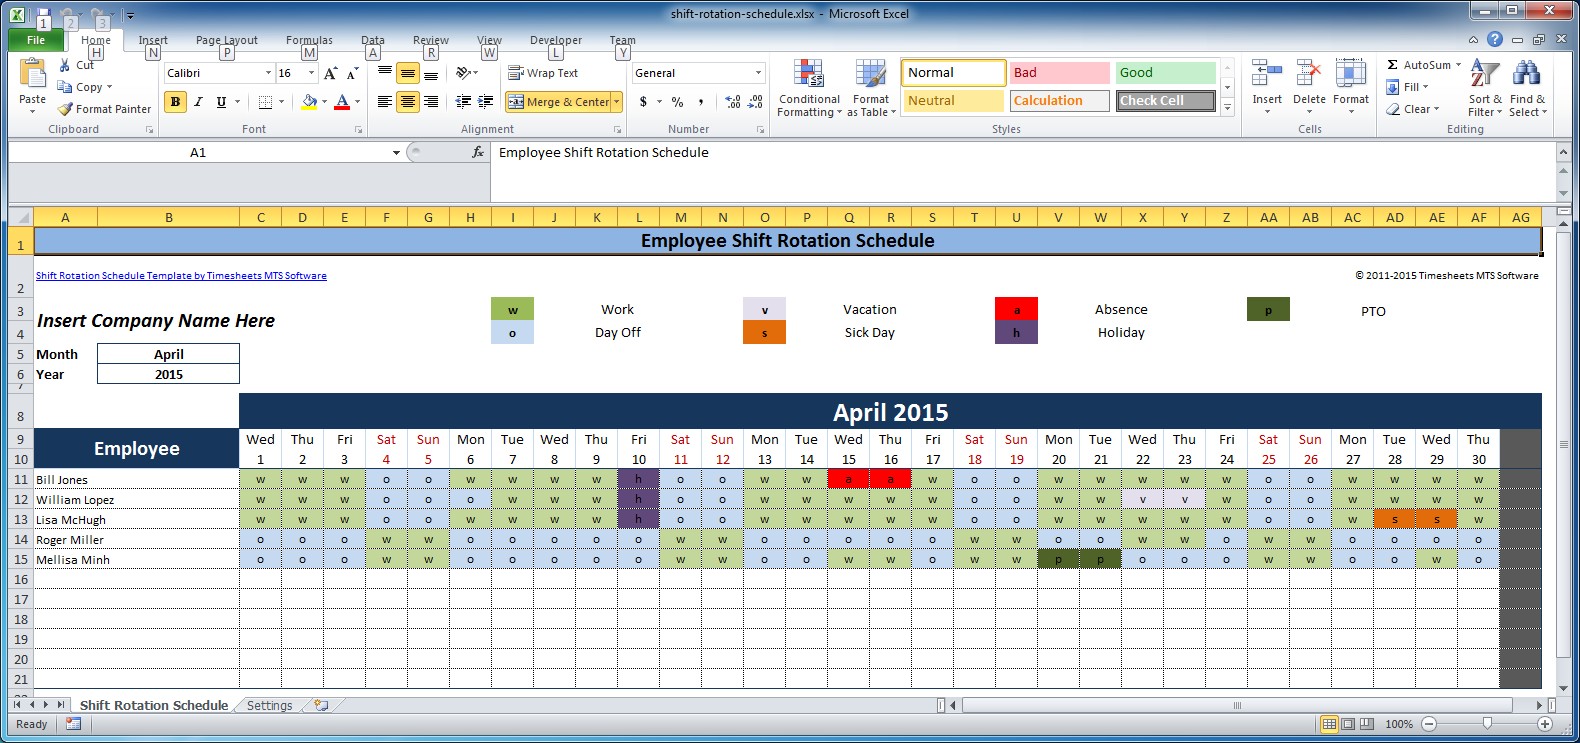 Employee Shift Schedule Template 8+ Free Word, Excel, PDF Format 